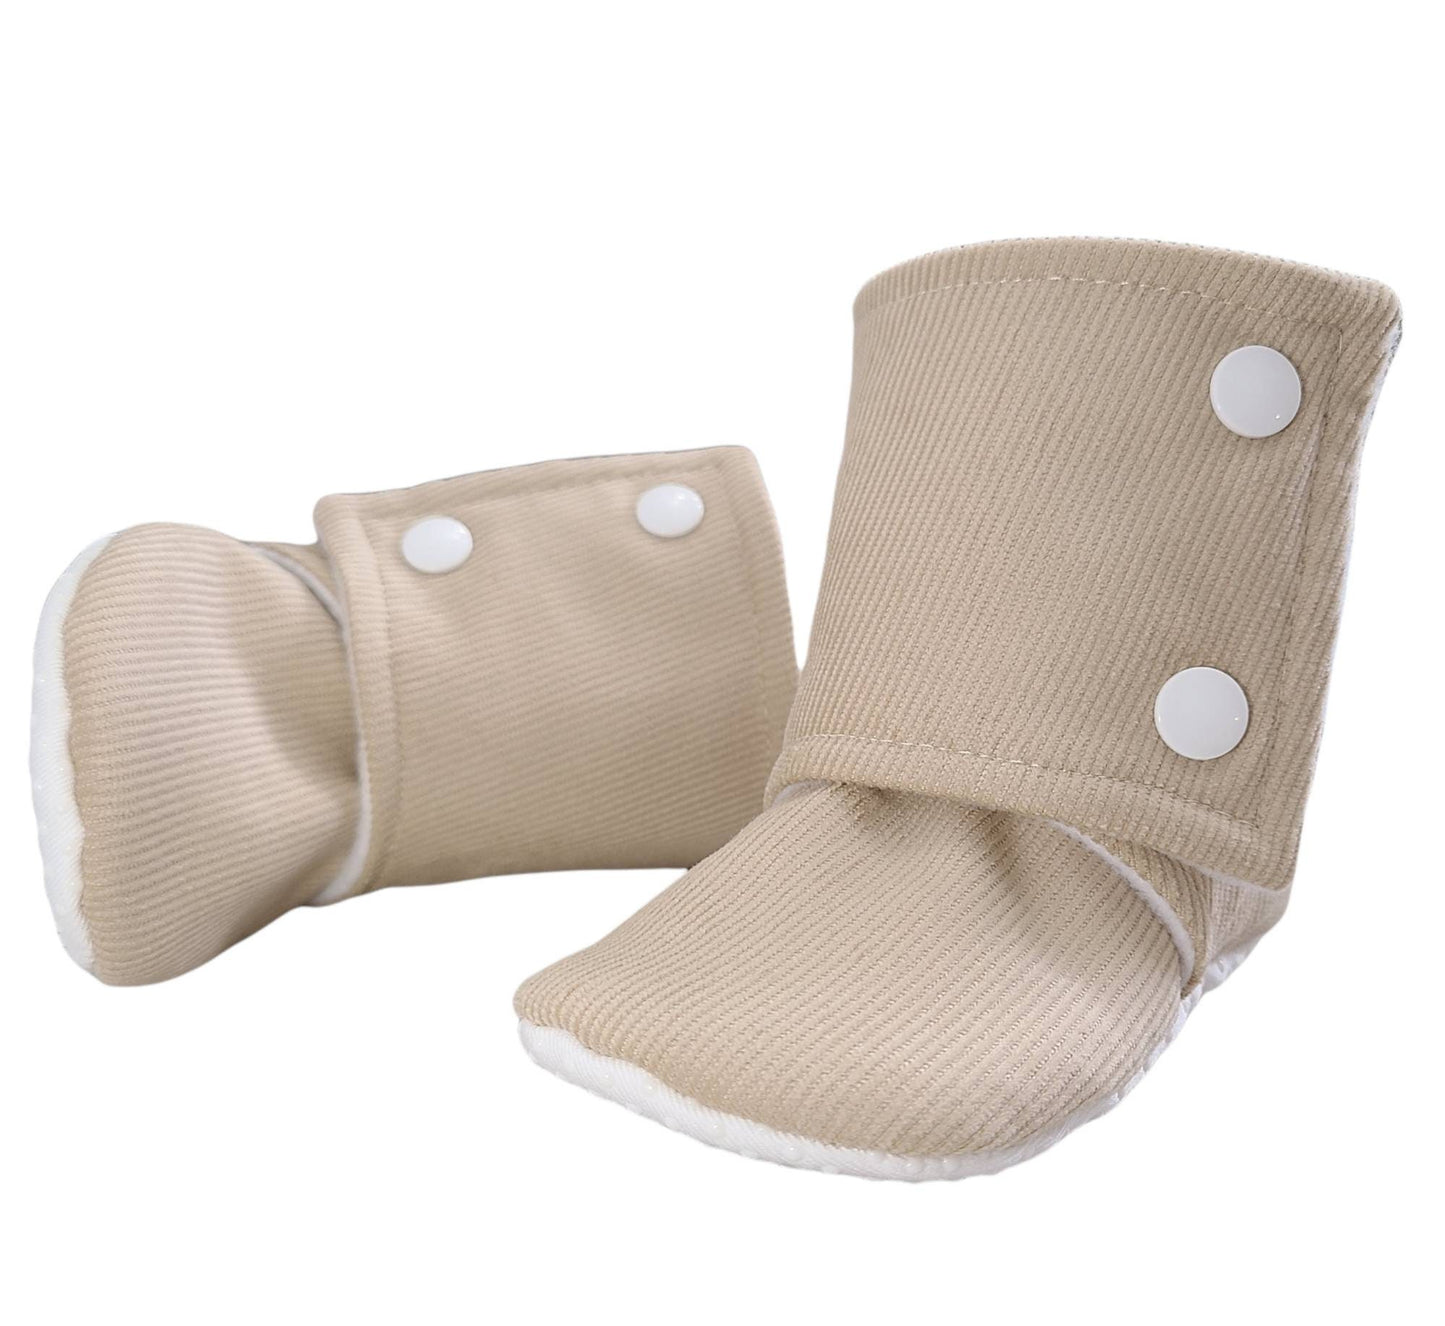 Tan Baby Booties, Tan Corduroy Baby Boots, Tan Stay-on Boots, Tan Fabric Boots, Baby Shower, Baby Girl, Baby Boy, Tan Stay-on Booties